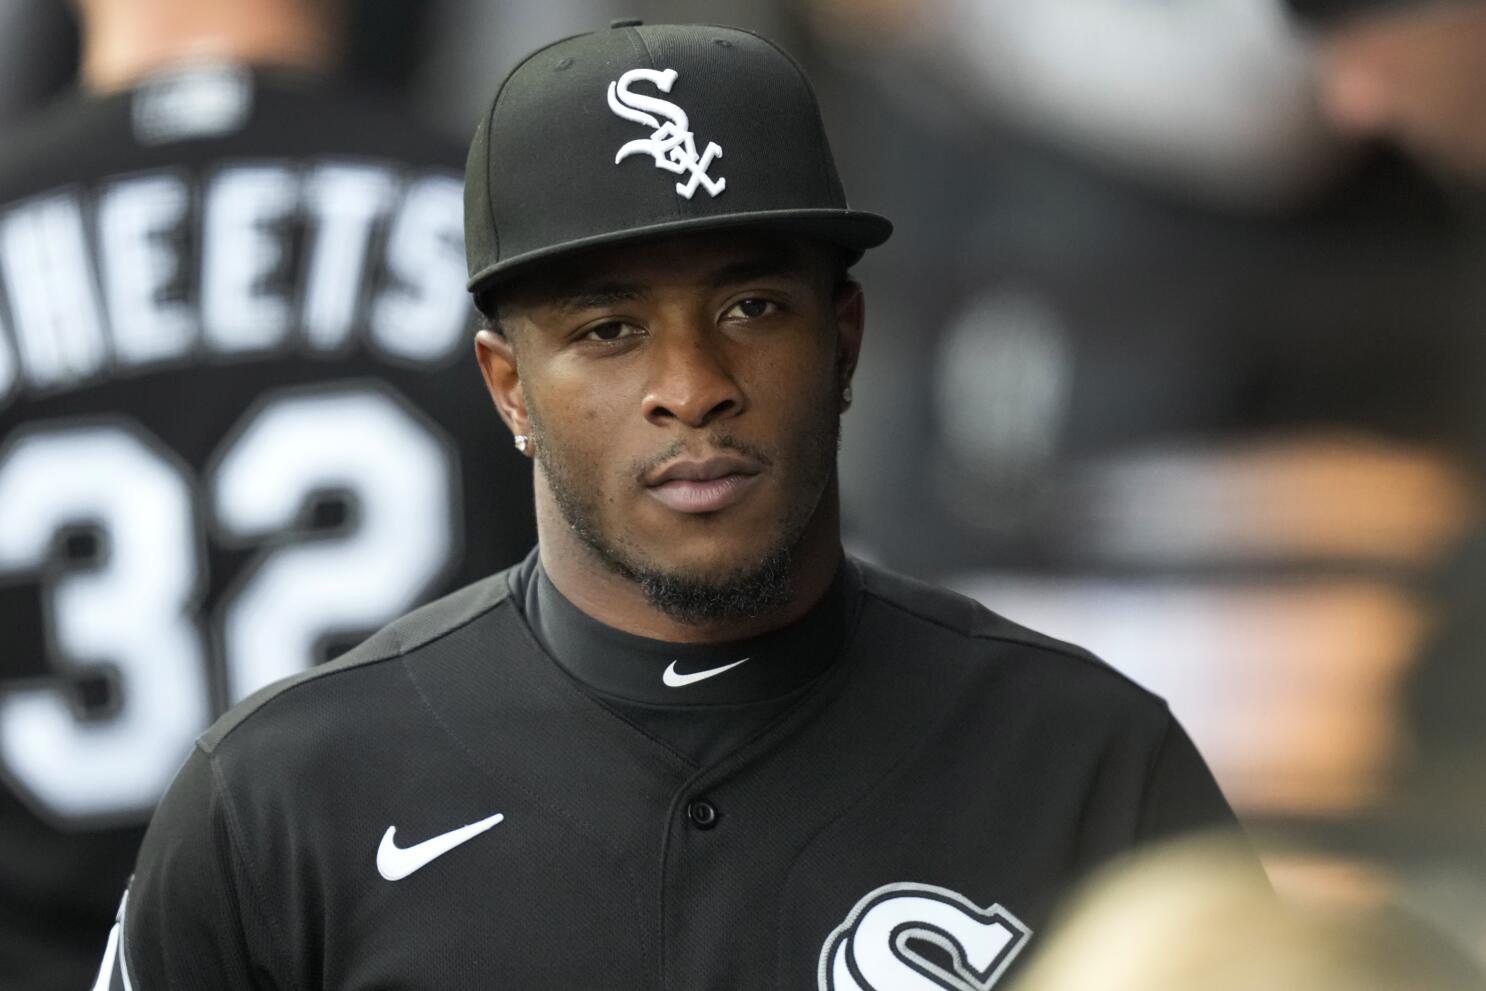 Tim Anderson Is No Longer A Bargain Shortstop For Chicago White Sox